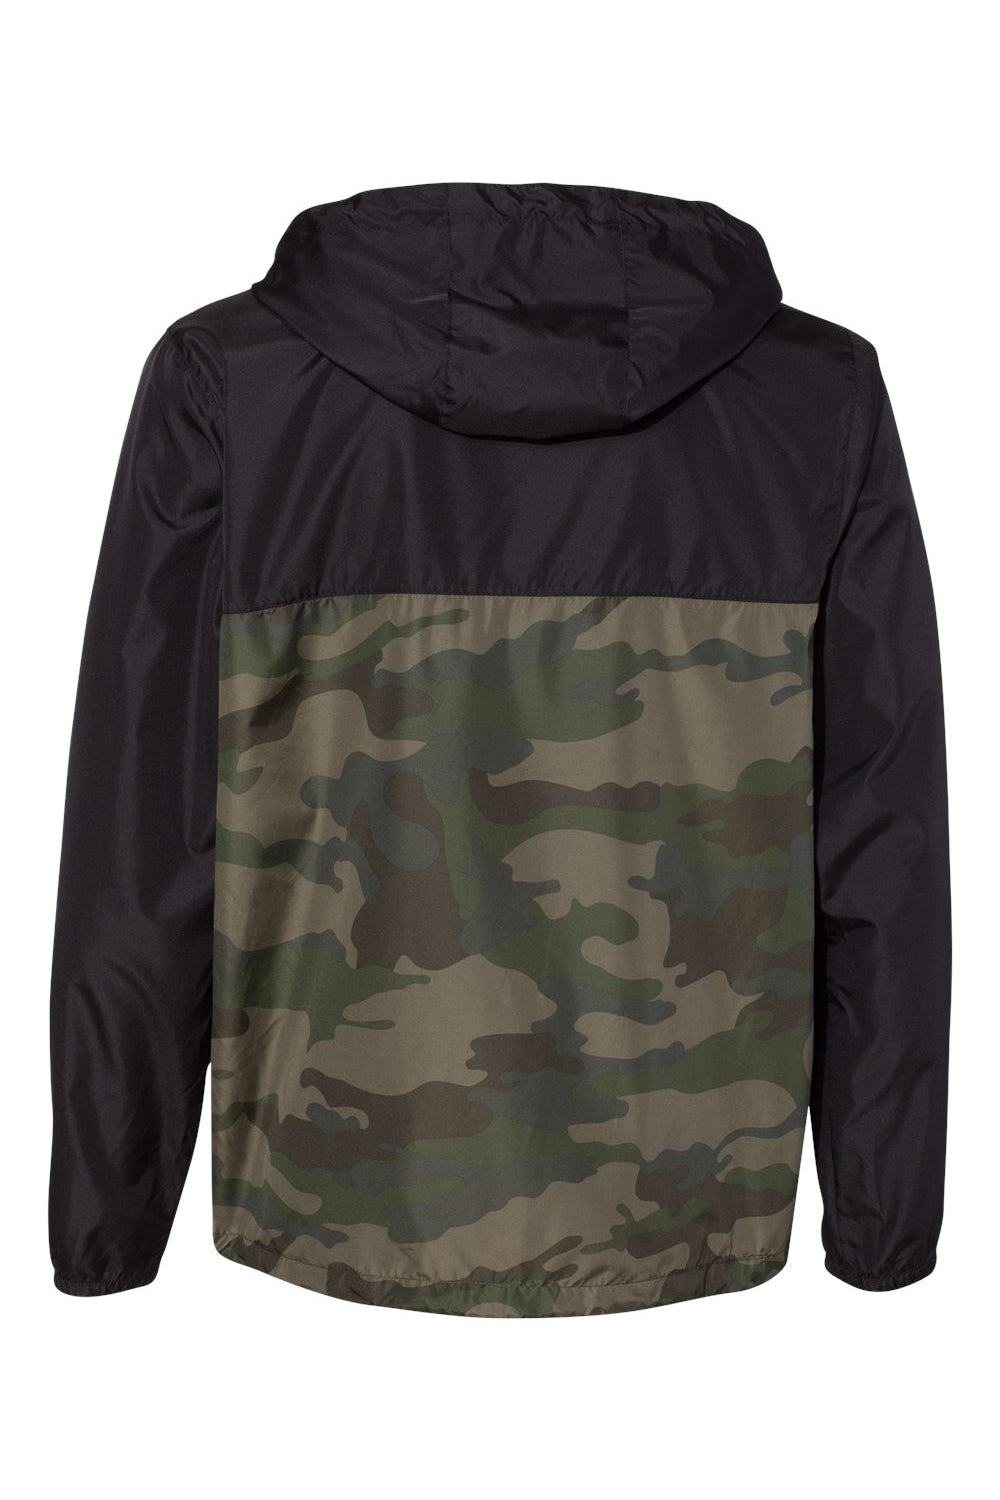 Independent Trading Co. EXP54LWZ Mens Full Zip Windbreaker Hooded Jacket Black/Forest Green Camo Flat Back